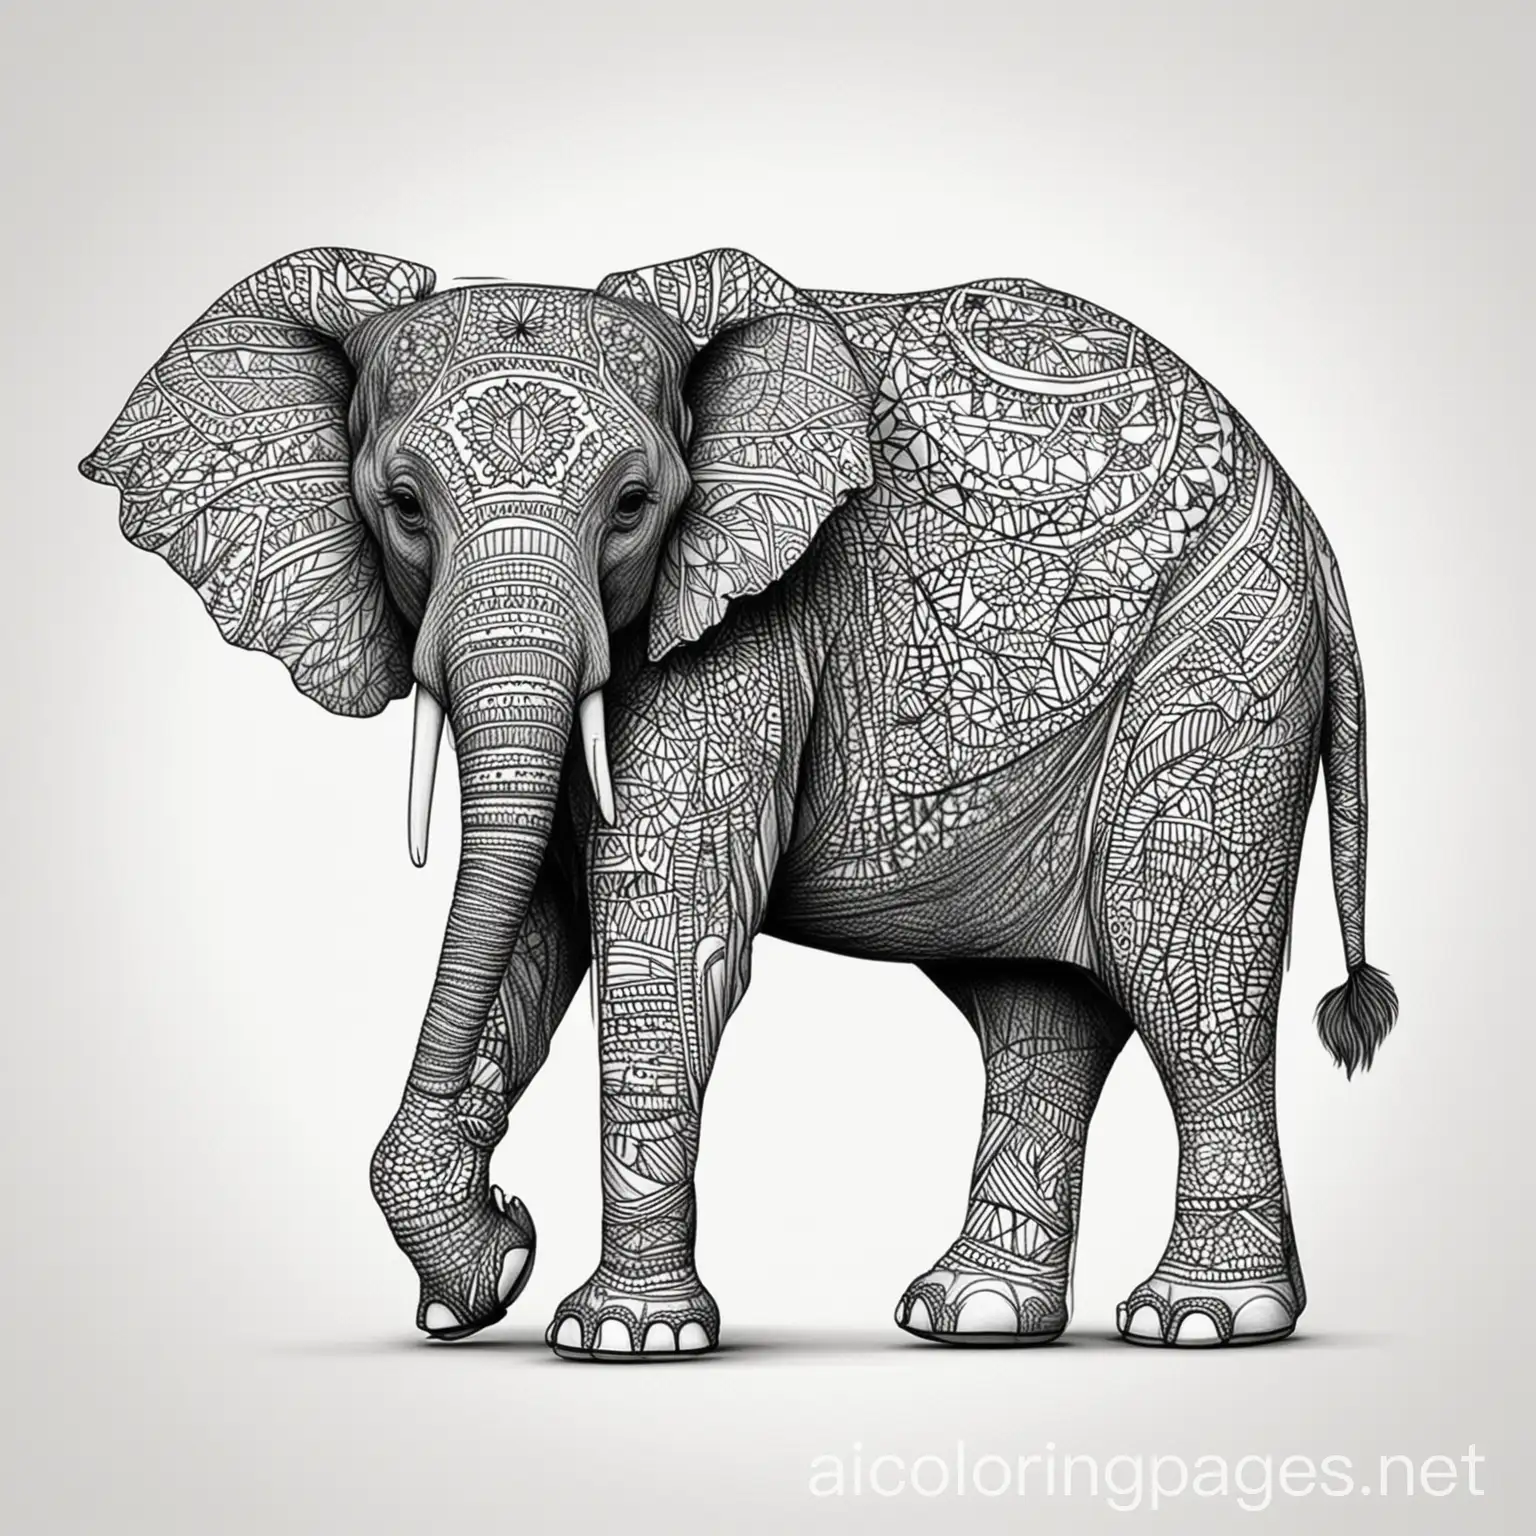 A elephant with pattern inside of it,no coloring,no shades,thick lines, Coloring Page, black and white, line art, white background, Simplicity, Ample White Space.